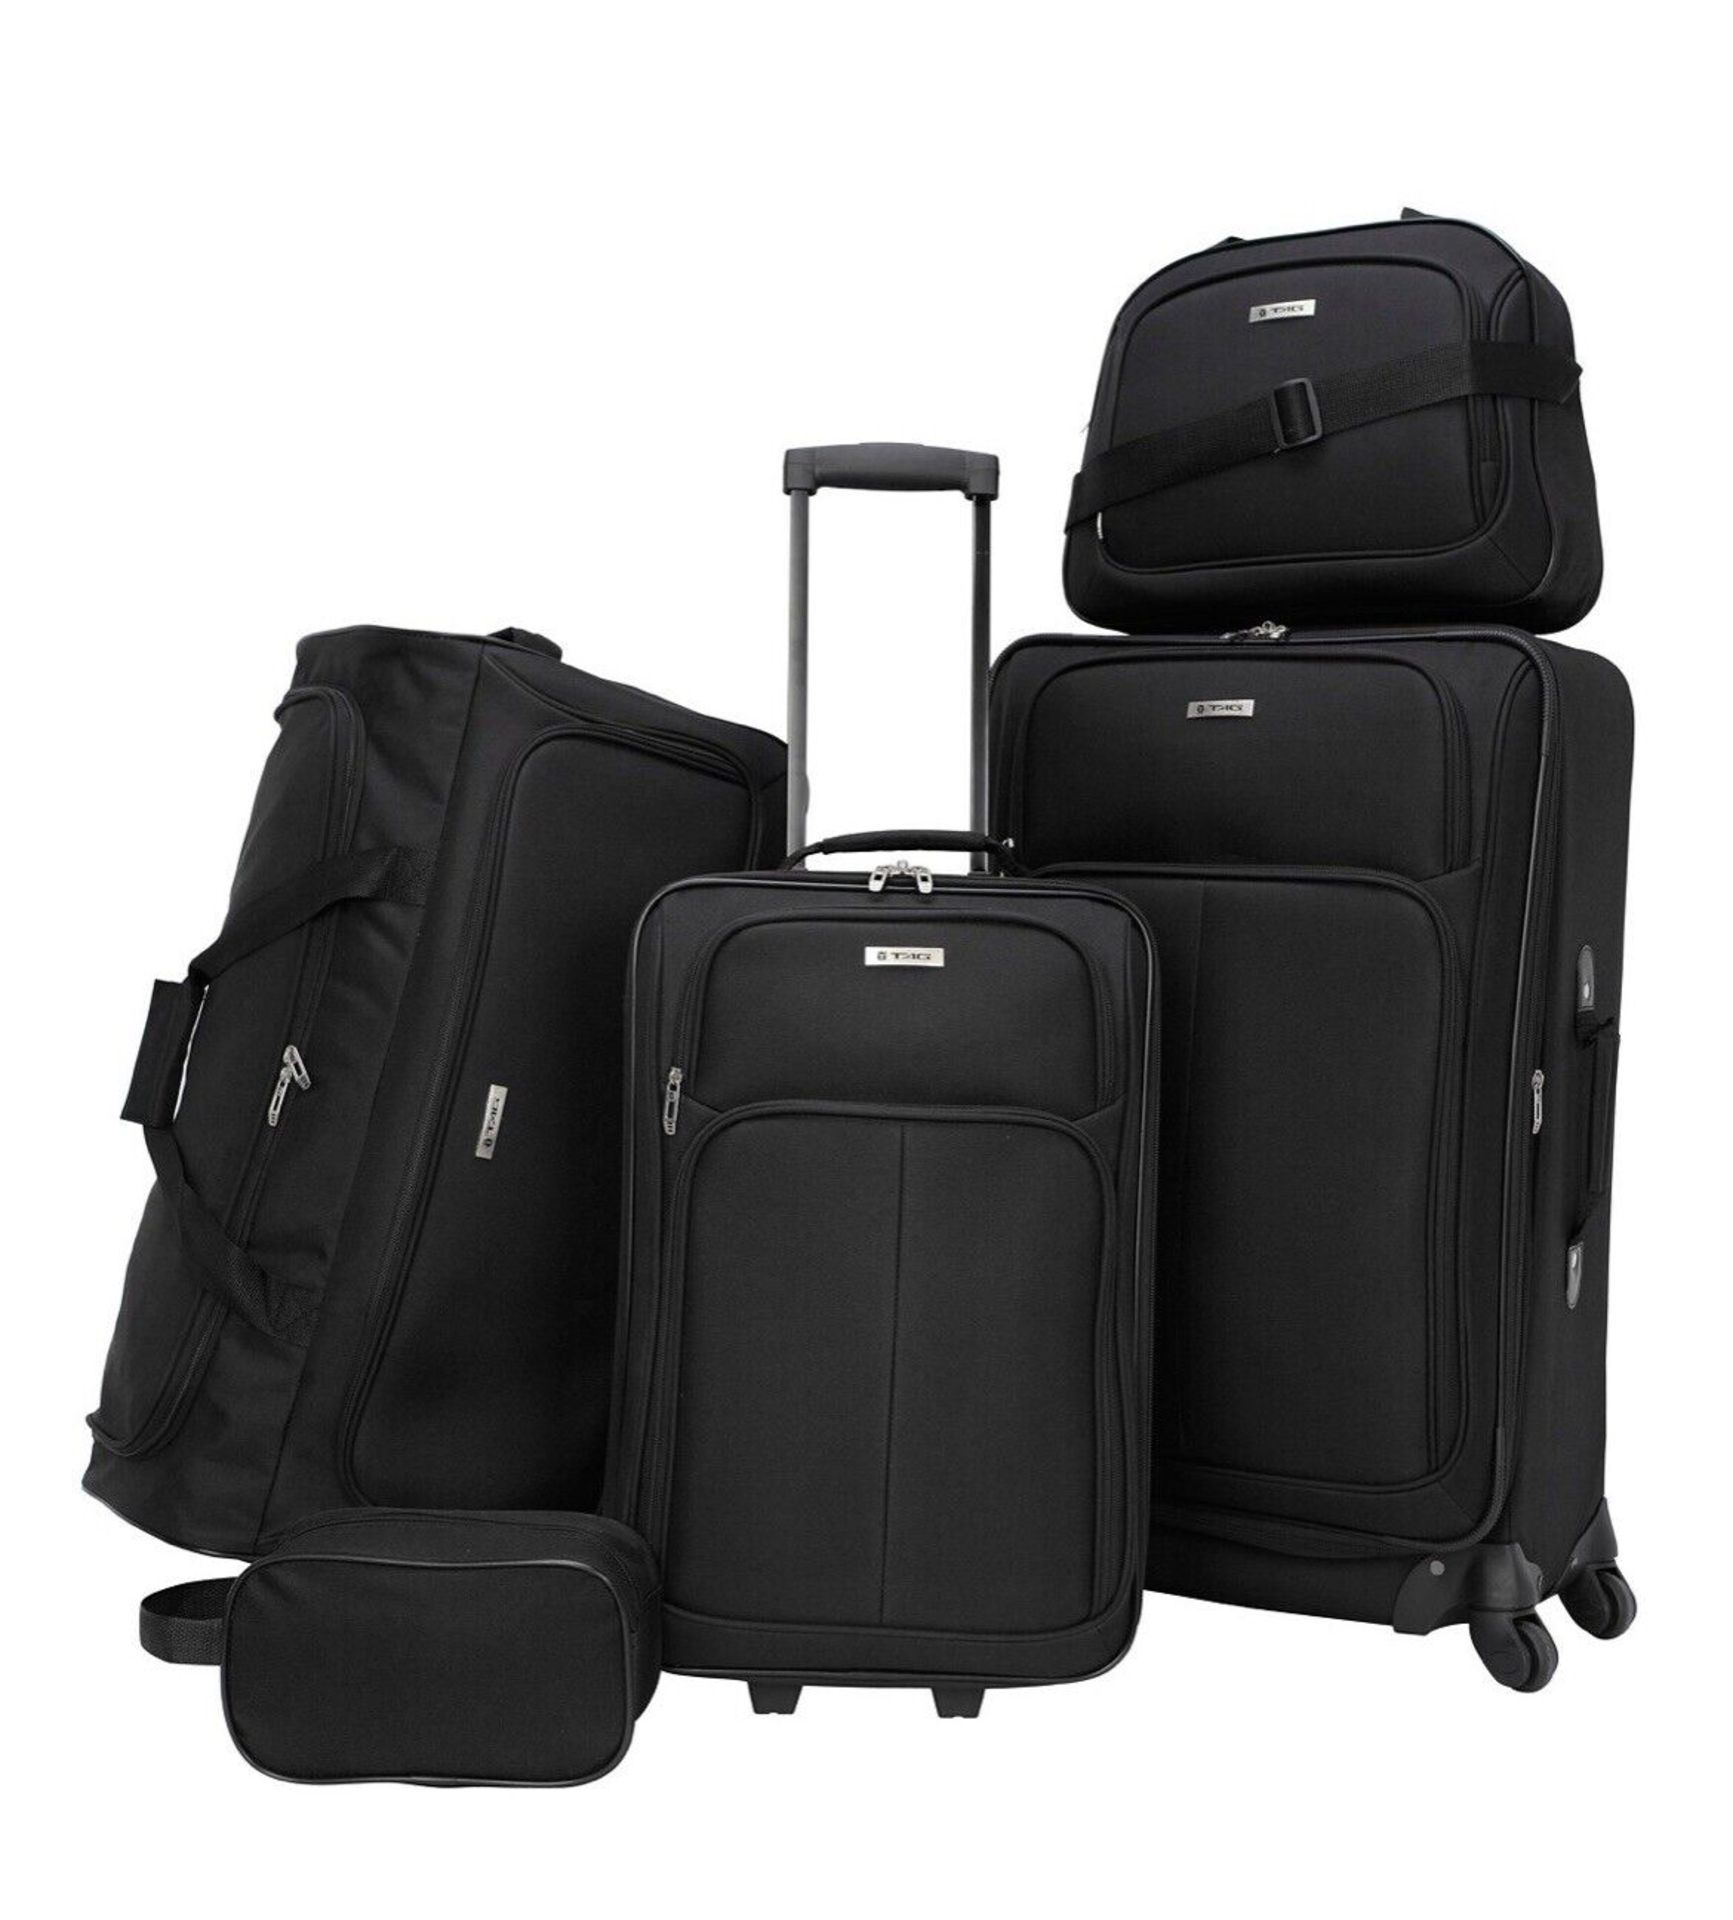 3 X NEW SETS OF TAG Ridgefield Black 5 Piece Softside Luggage Sets. RRP $300 per set, giving this